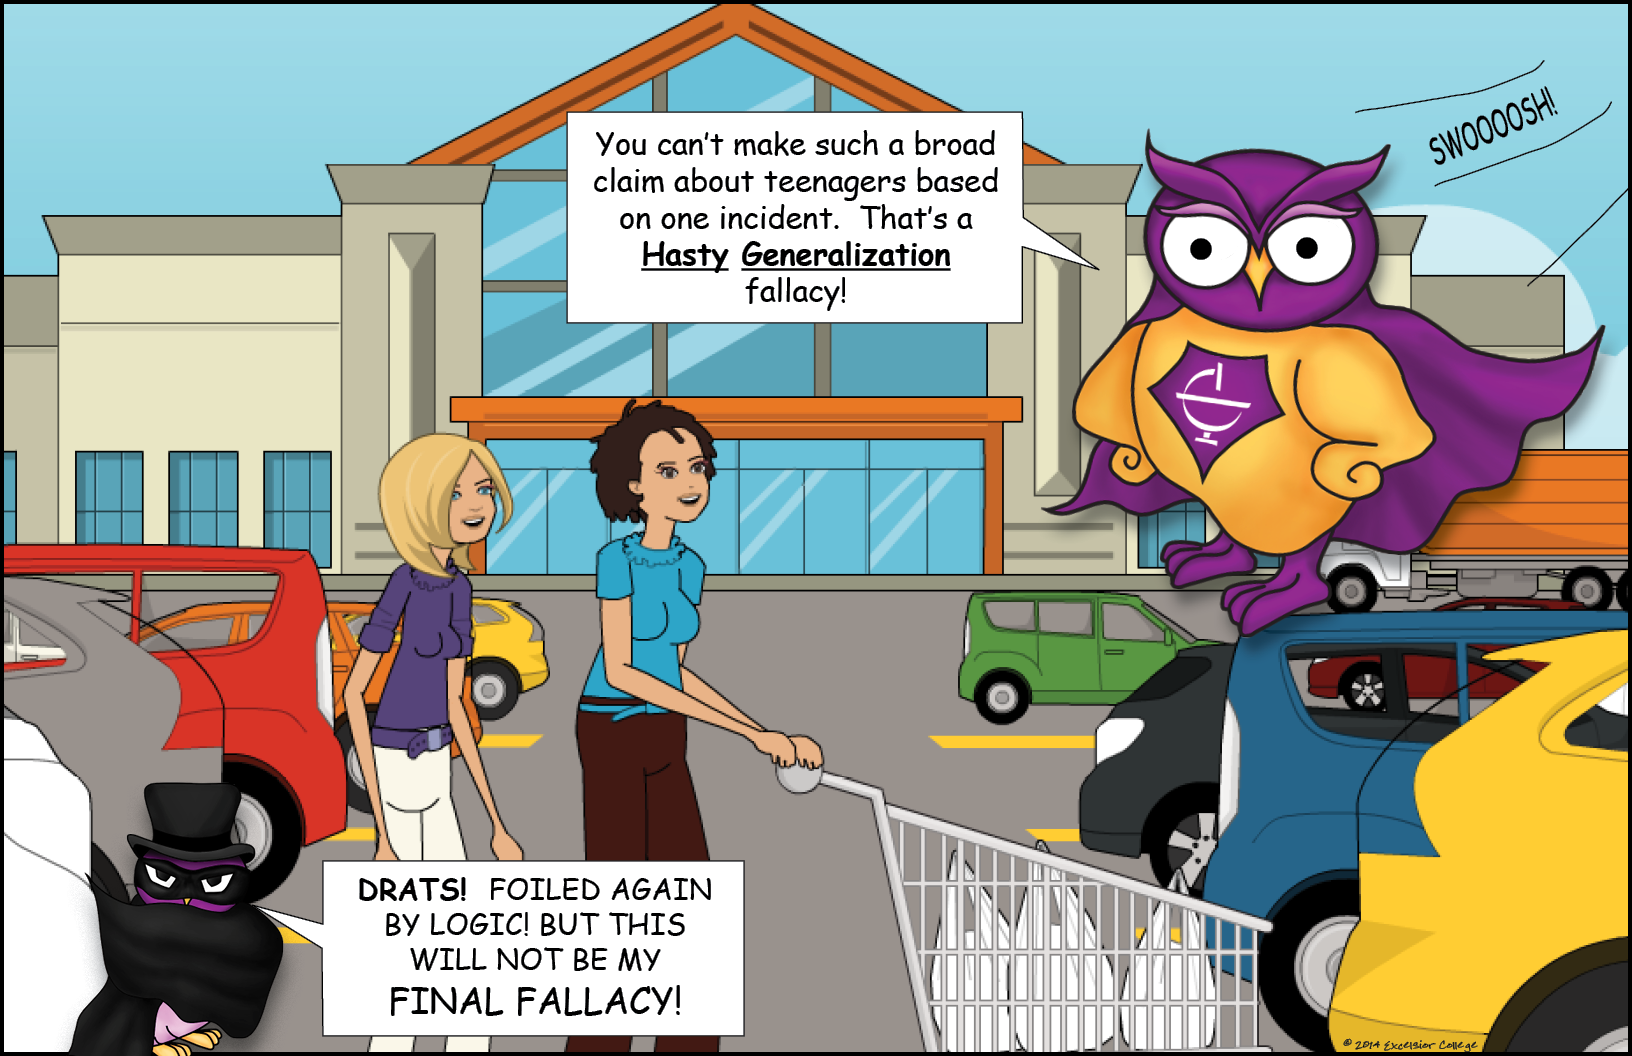 Hasty Generalization logical fallacy comic with the OWL Superhero